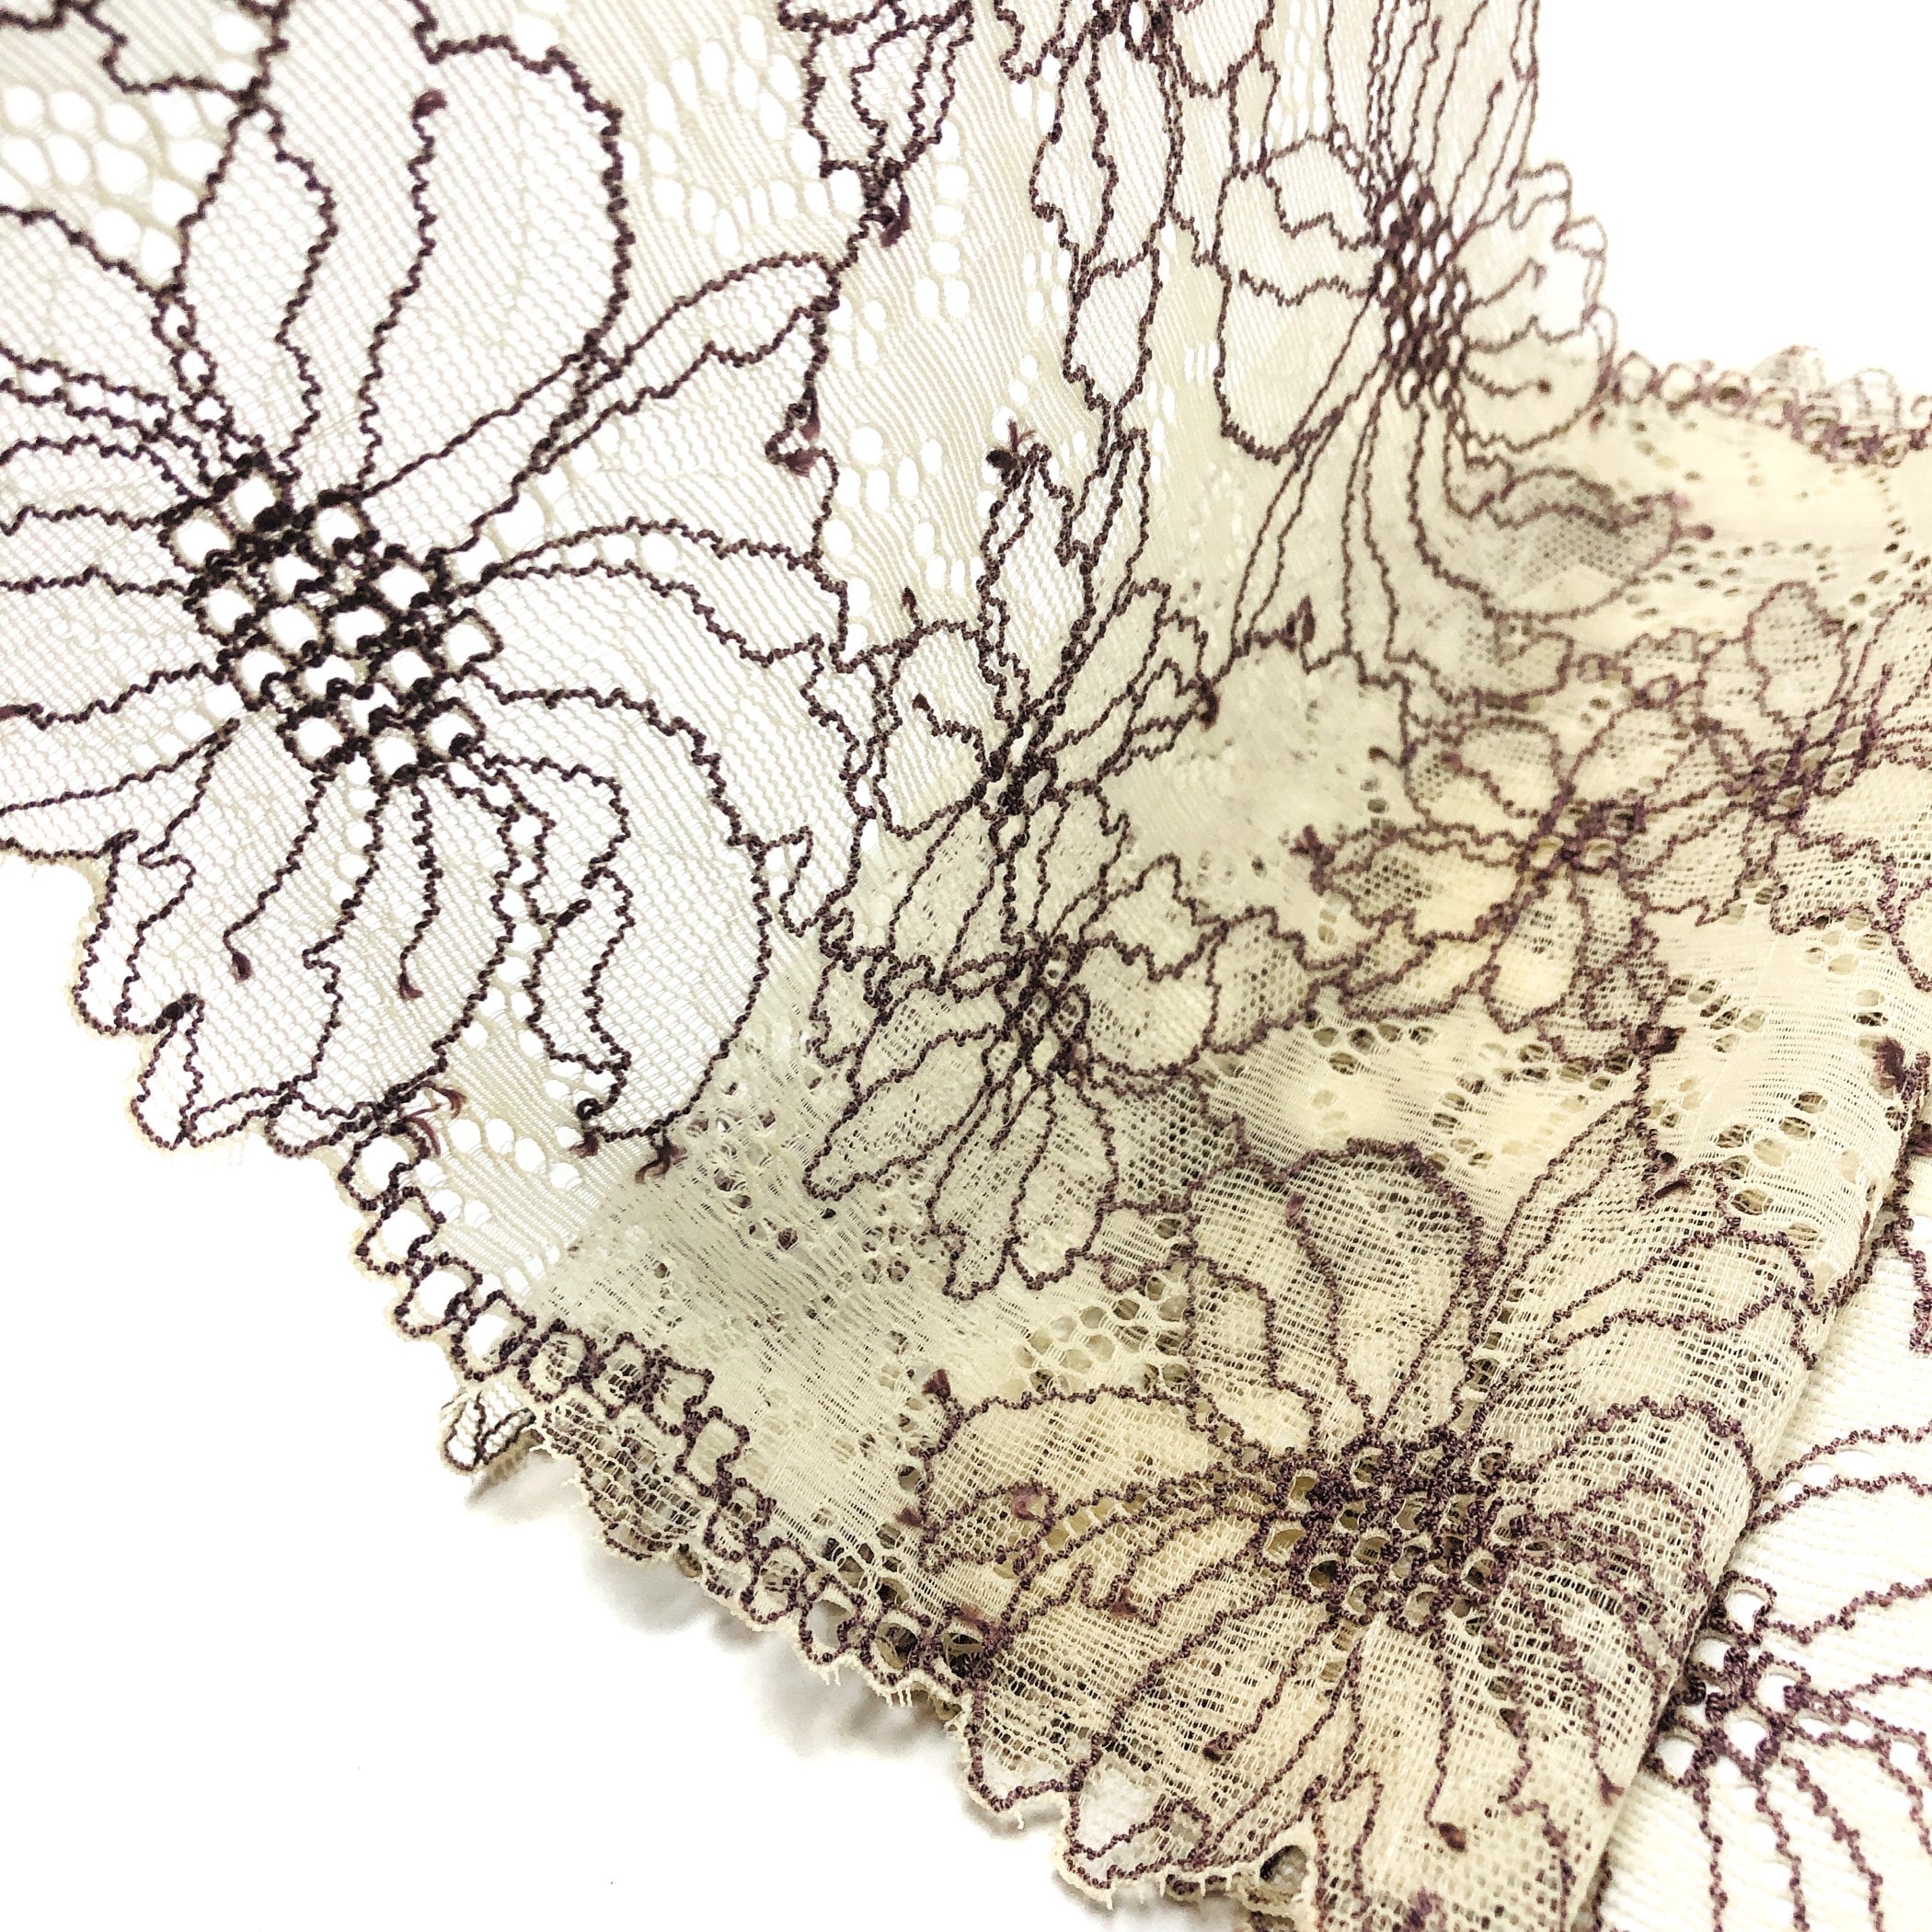 Lace Band 6 1/4 Wide Daisy Clusters Galloon Edge Stretch Lace Band 